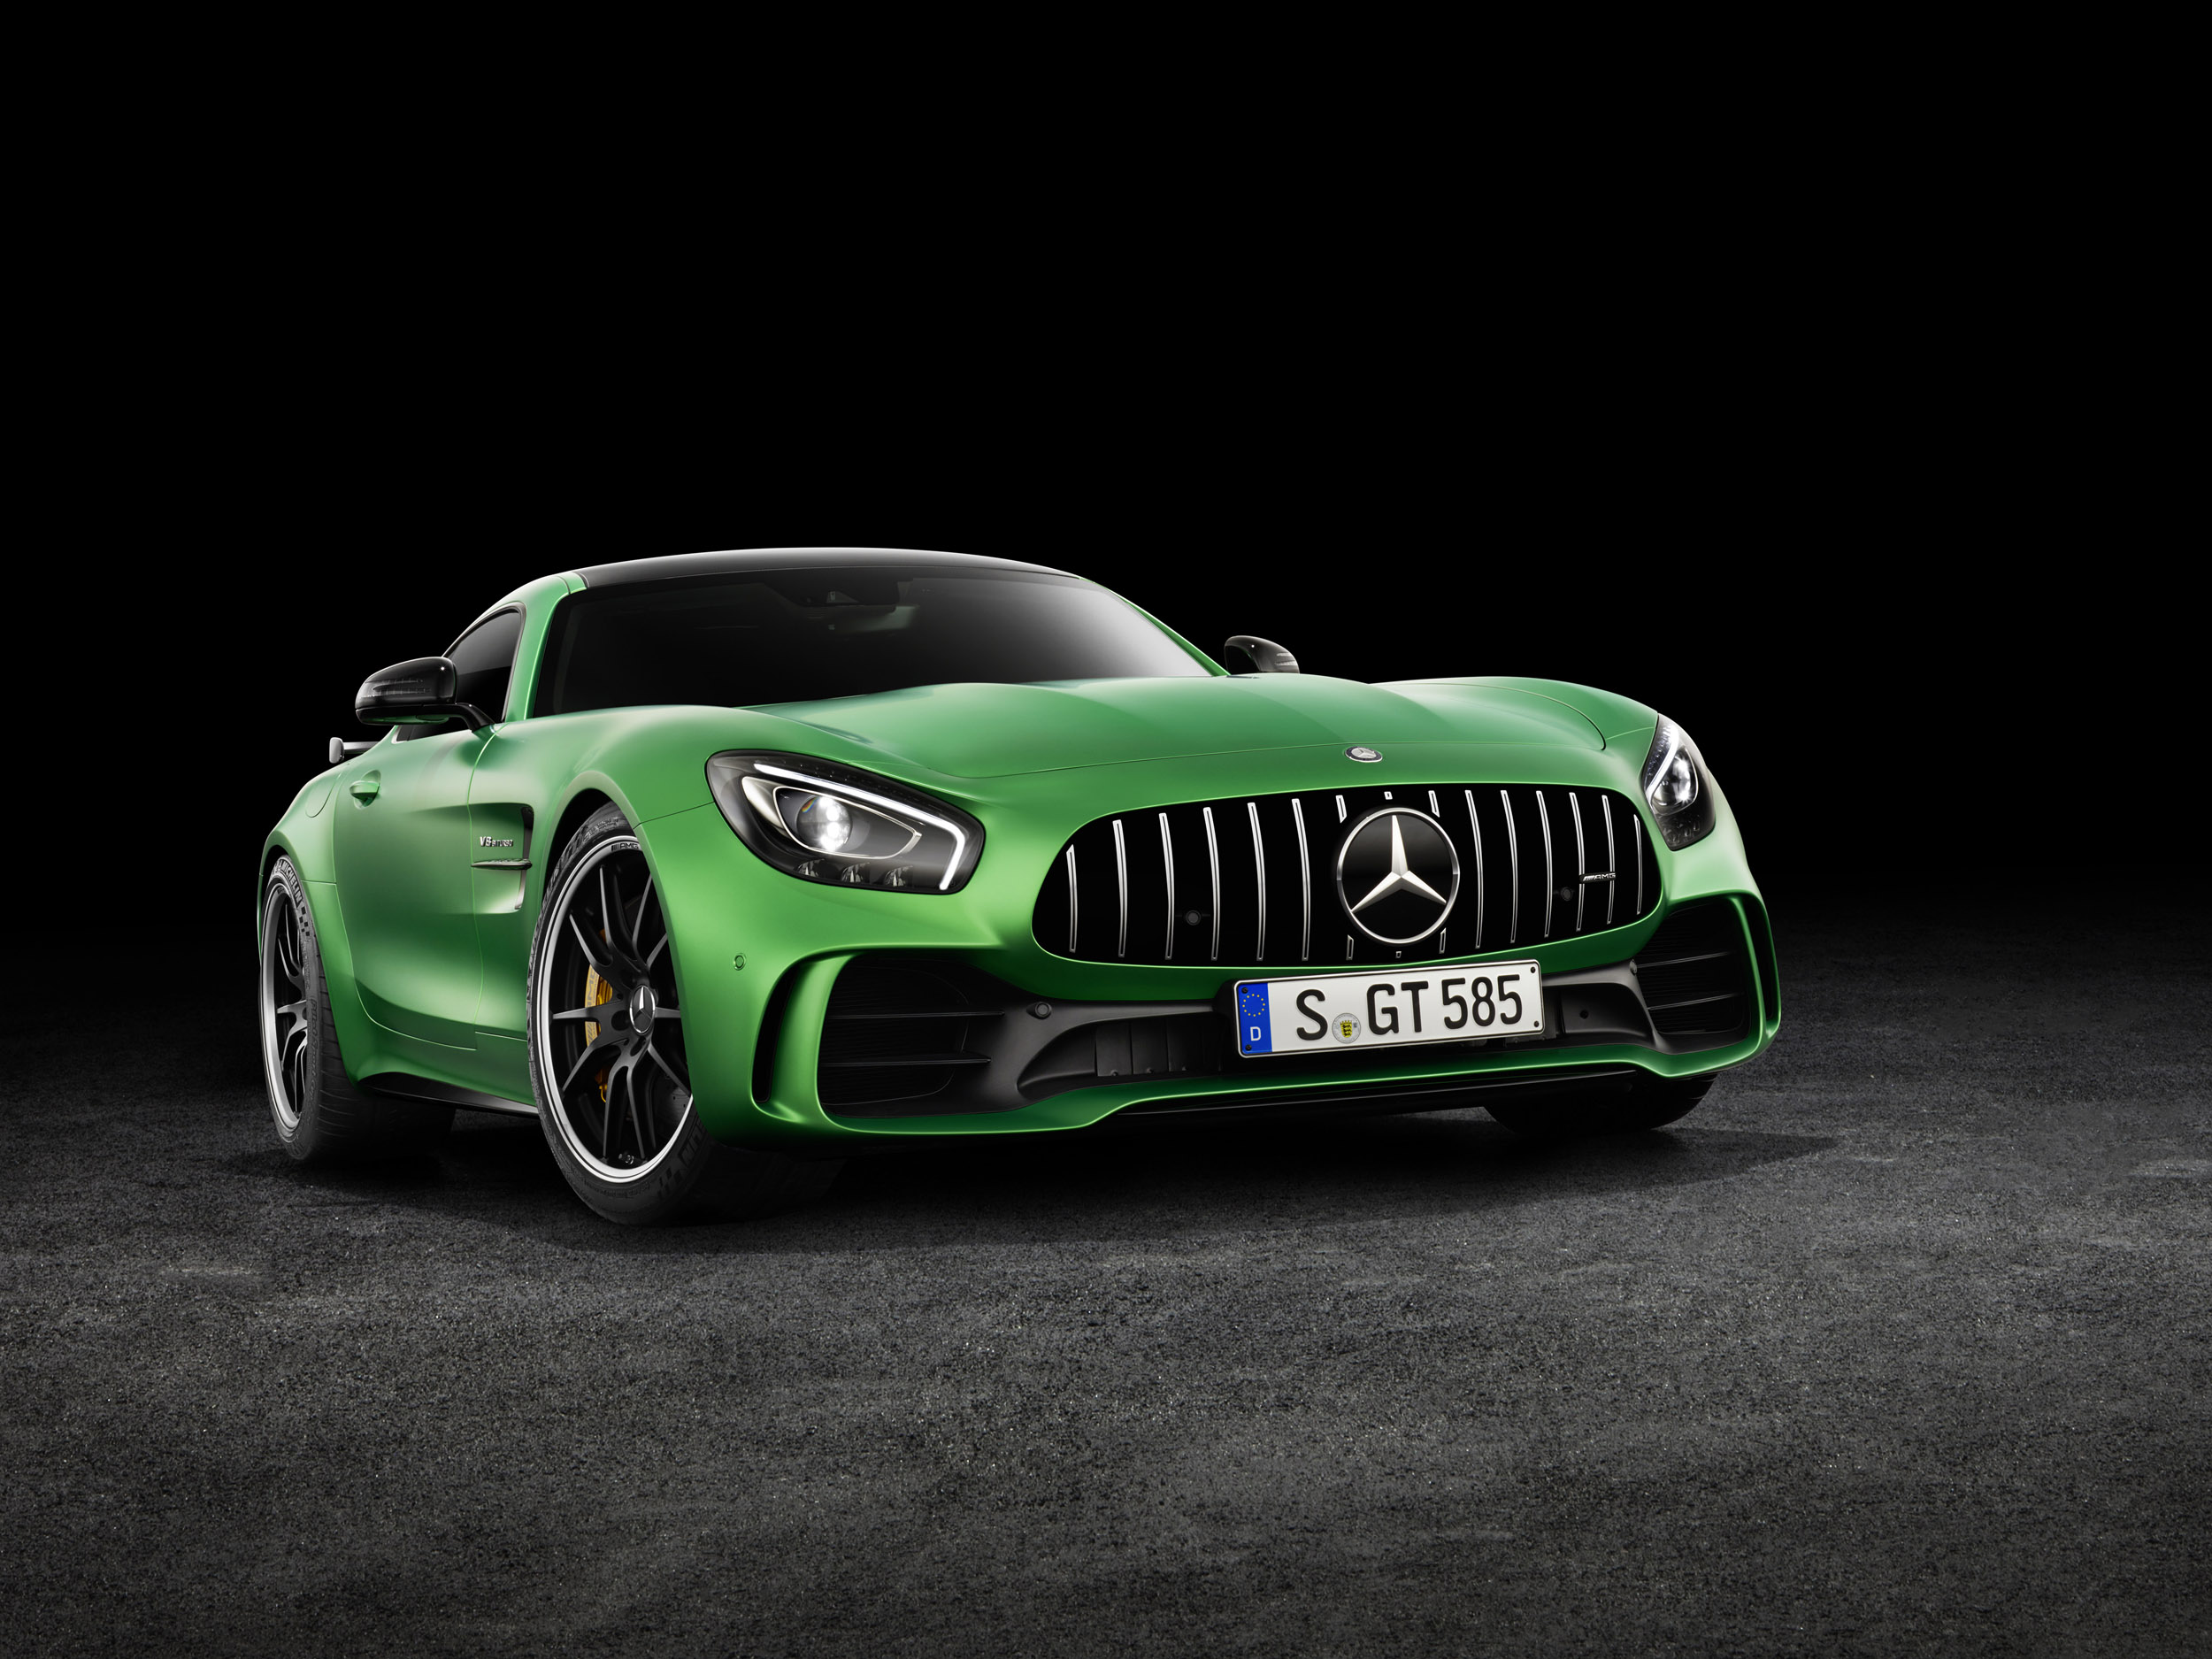 New Mercedes Amg Gt R Unveiled Price Announced For 577bhp Gt3 Rs Rival Evo